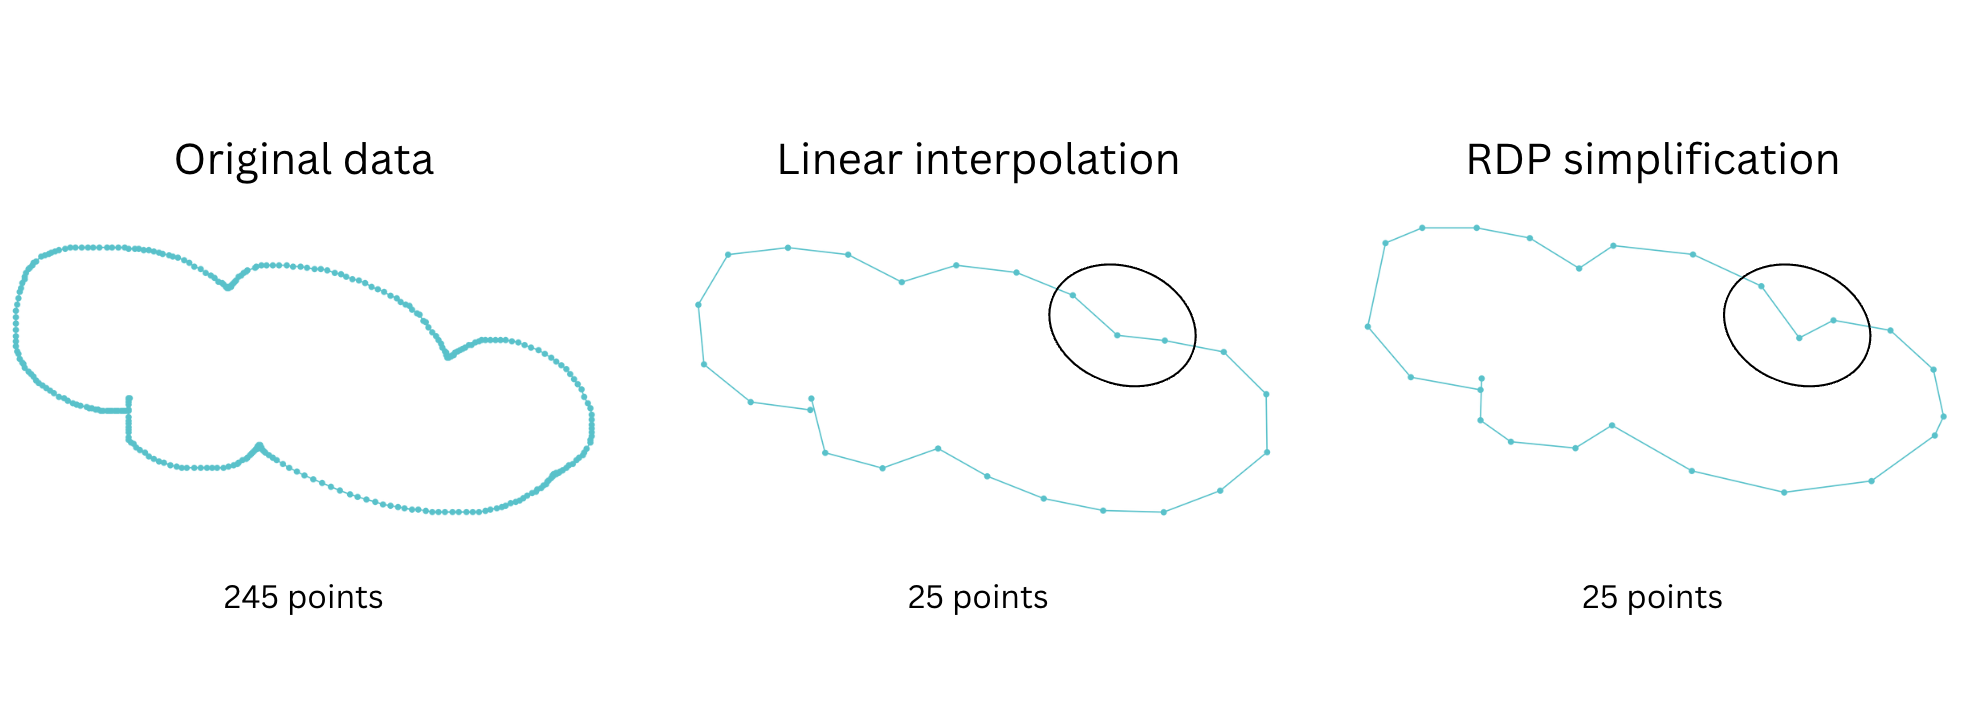 Comparison of data points: from left to right, the original, simplified data points using linear interpolation
and RDP simplification